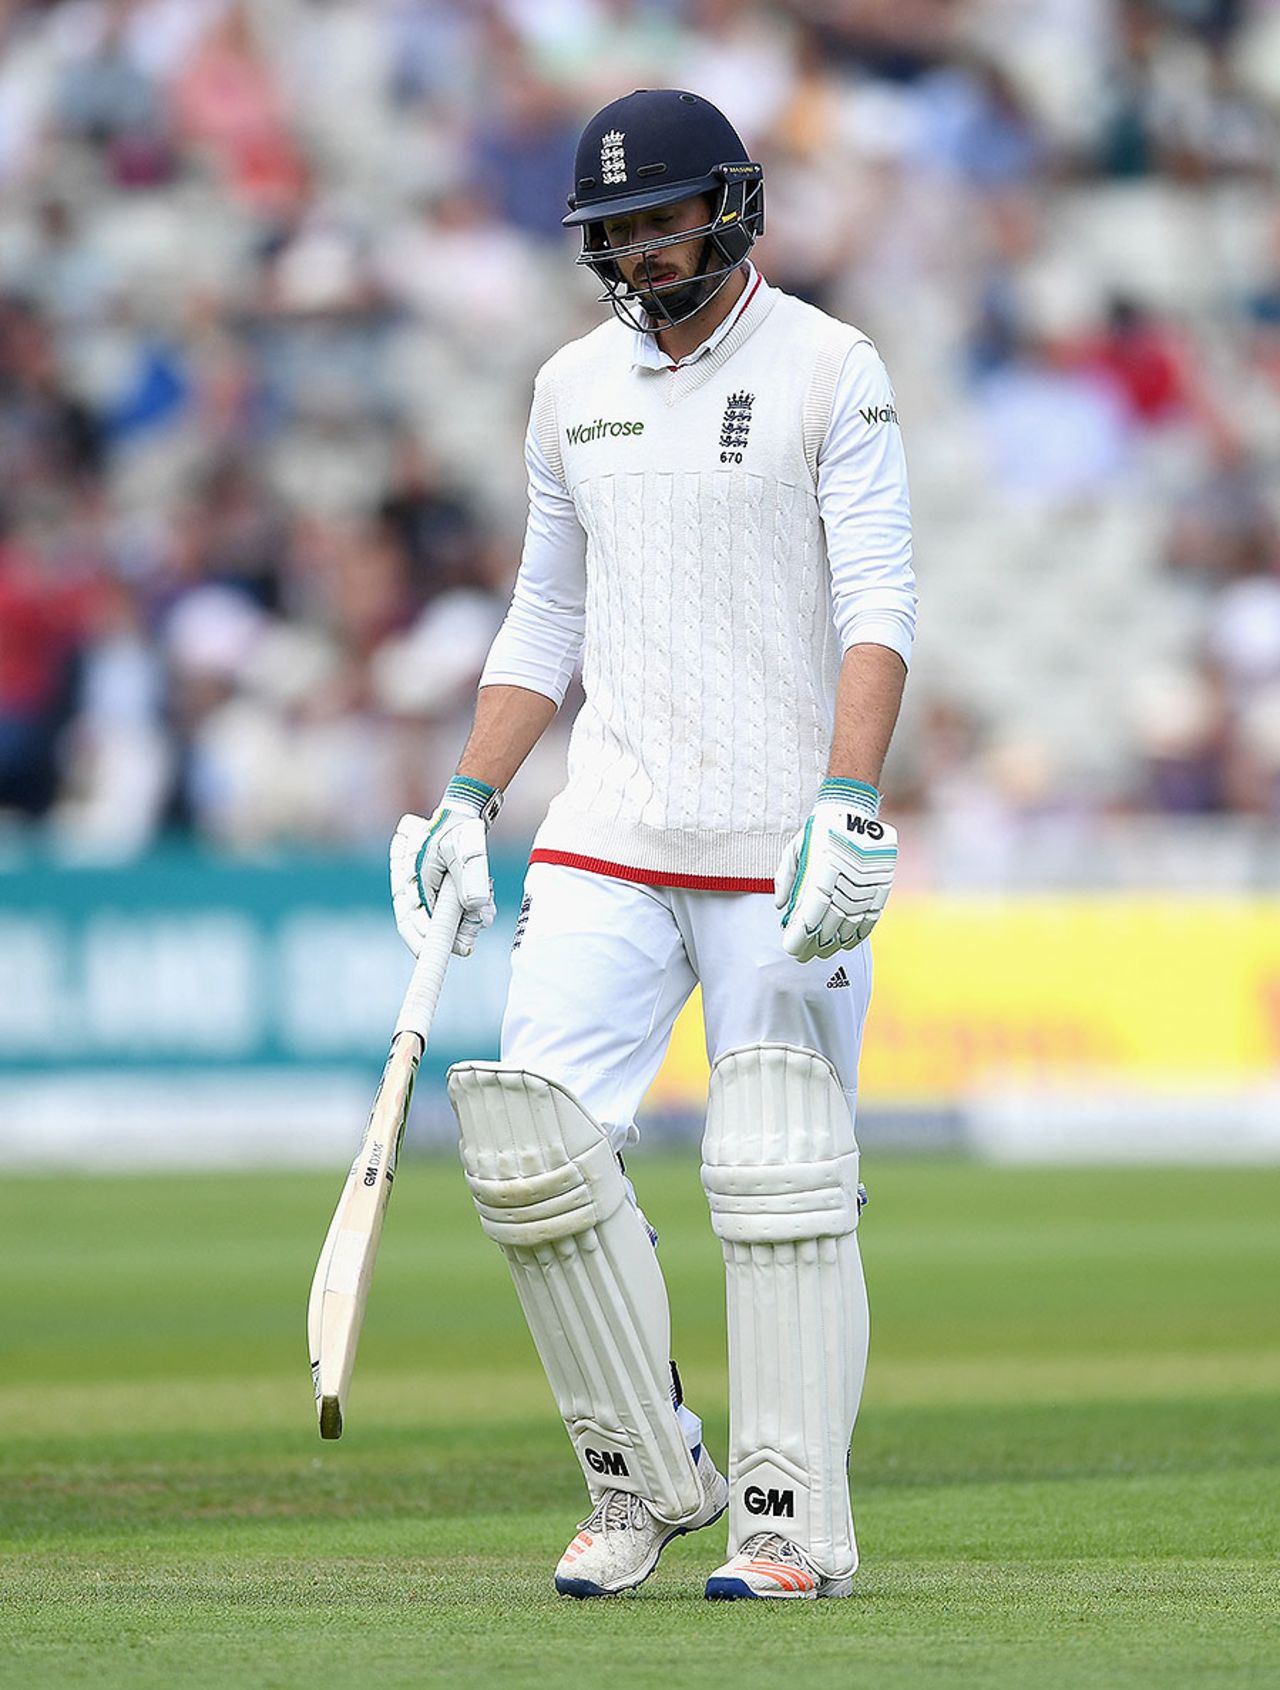 James Vince was caught in the slips for 39, England v Pakistan, 3rd Test, Edgbaston, 1st day, August 3, 2016